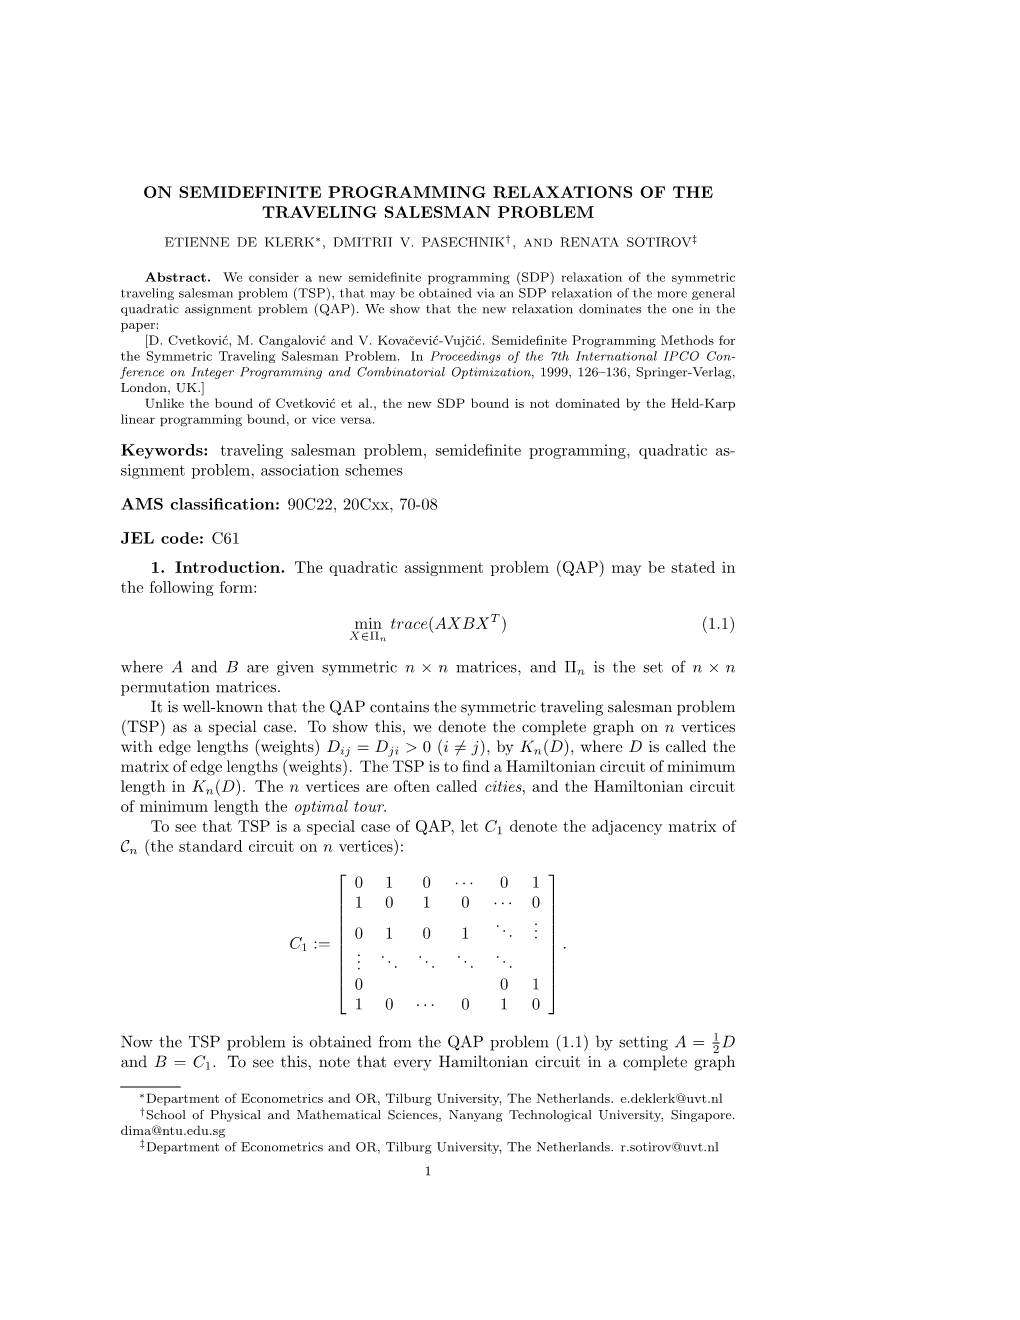 On Semidefinite Programming Relaxations of the Traveling Salesman Problem